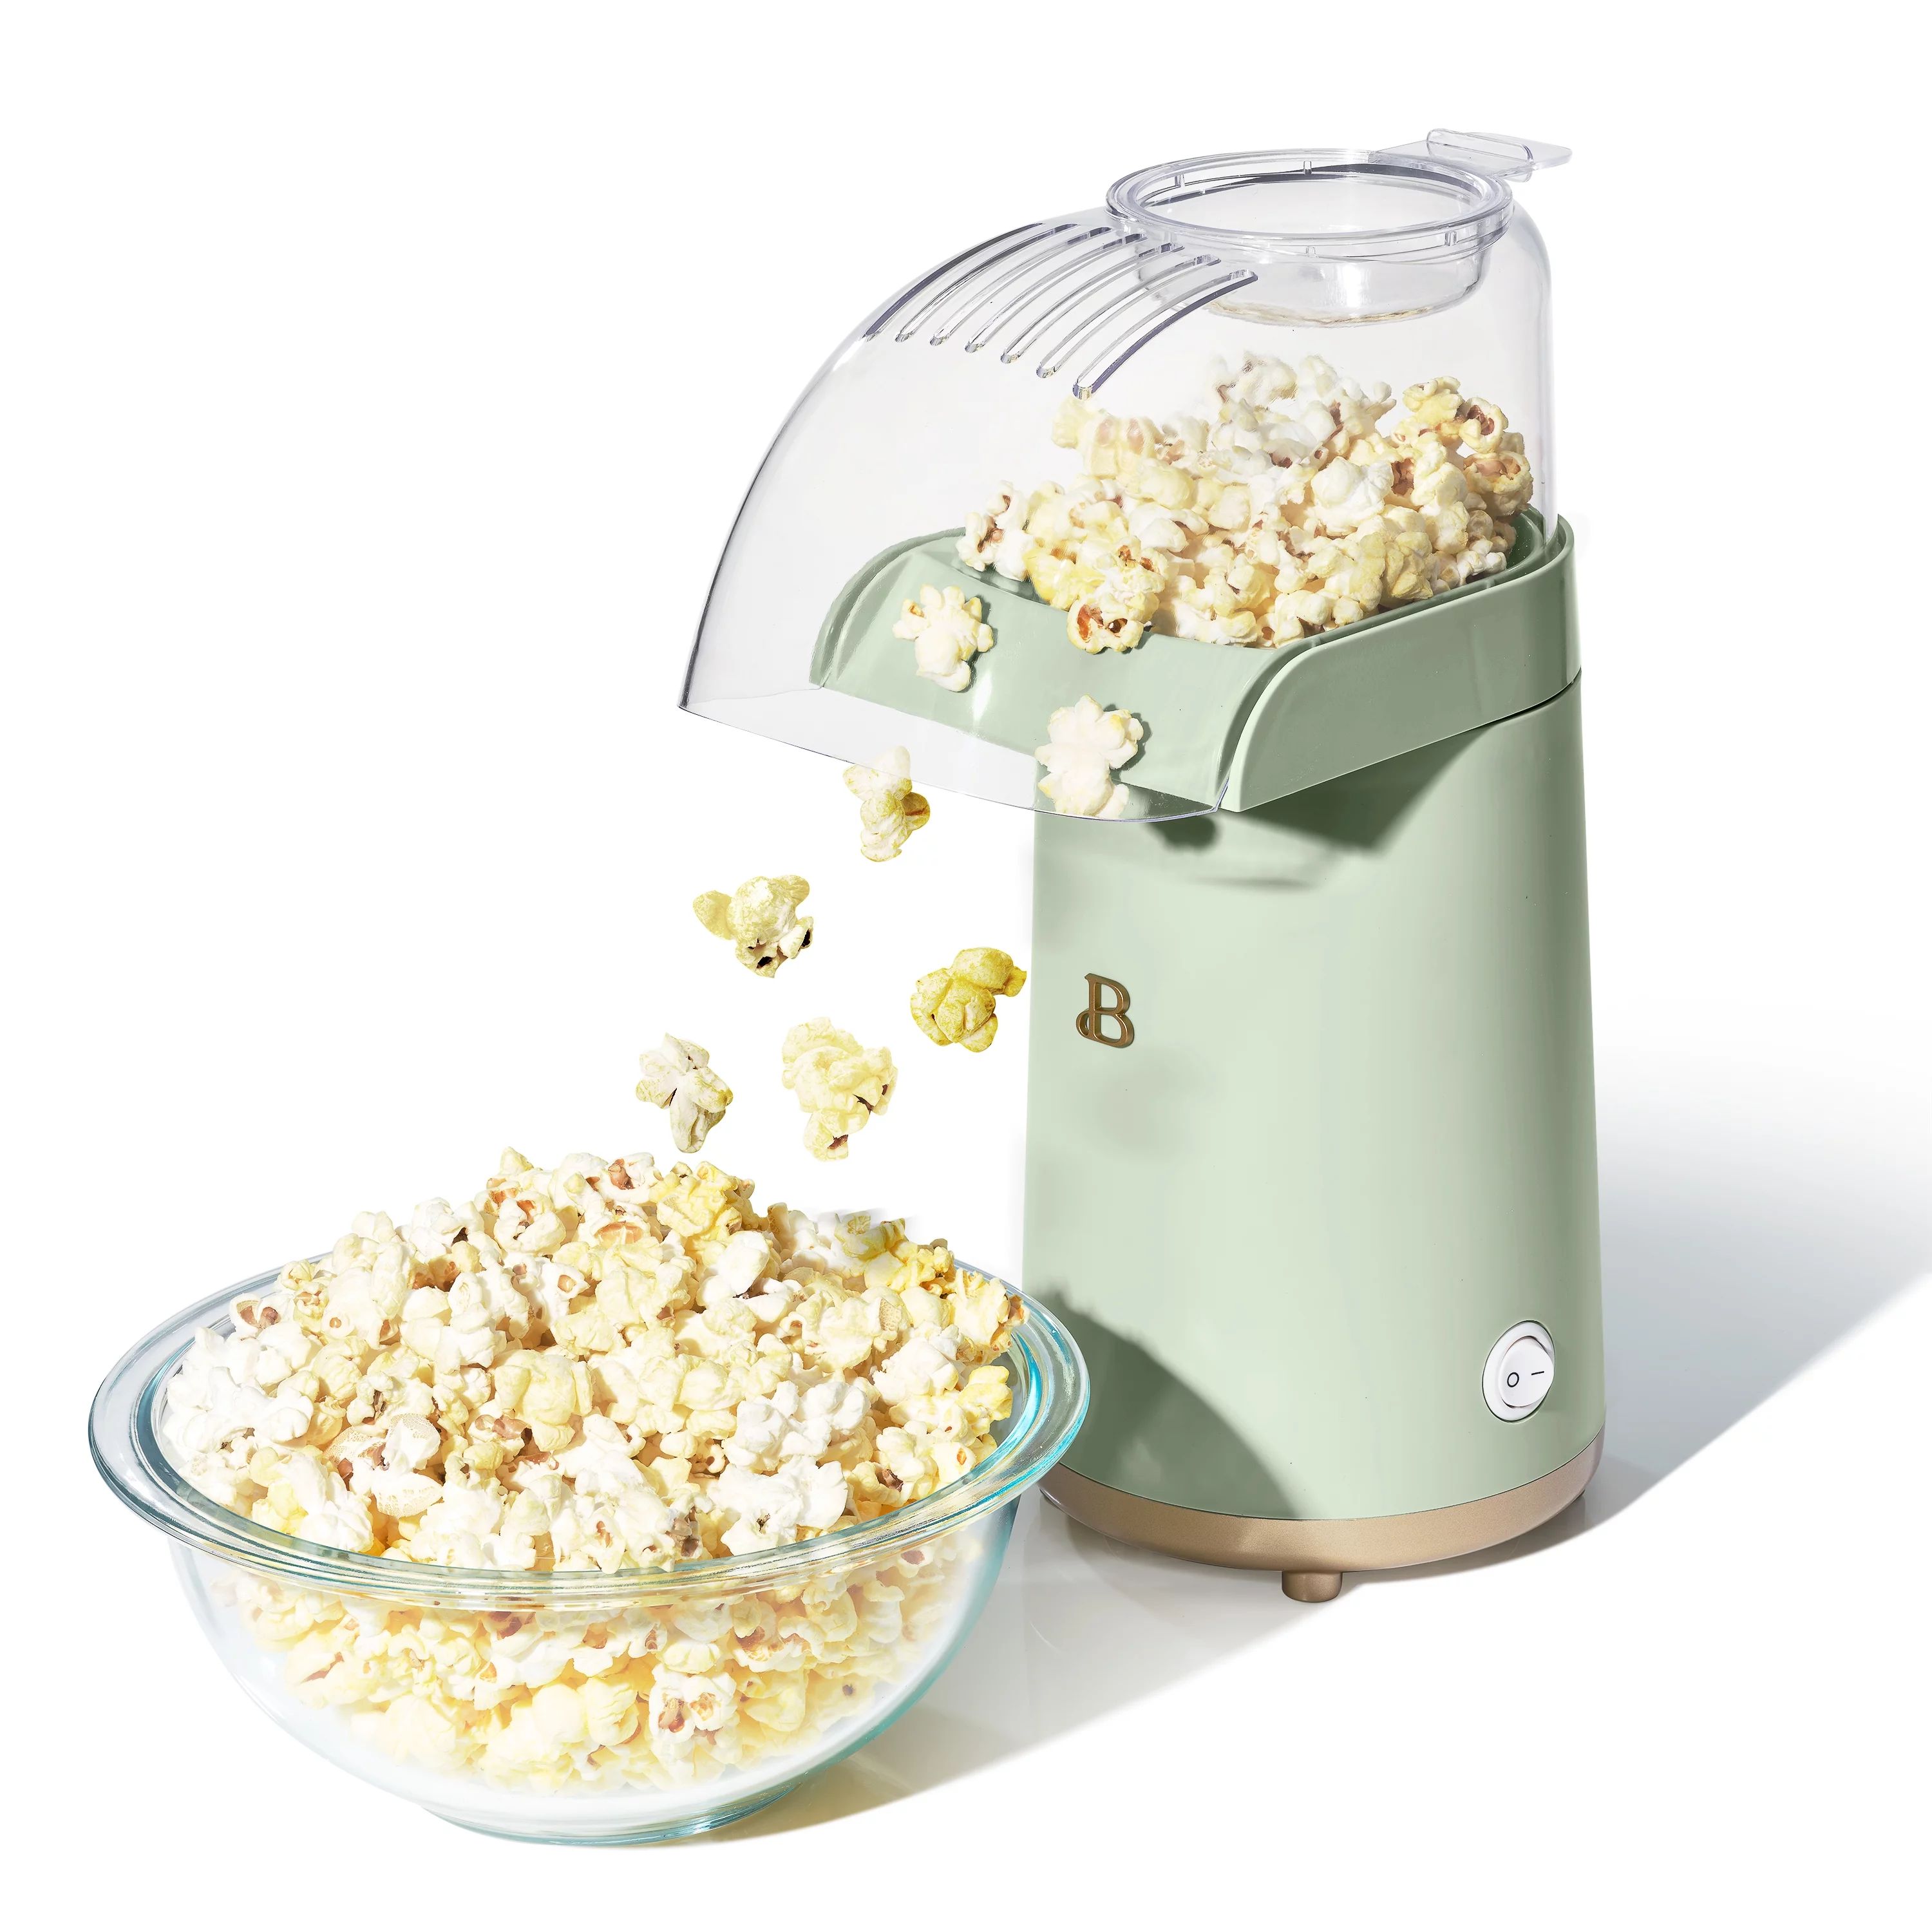 Beautiful 16 Cup Hot Air Electric Popcorn Maker, Sage Green by Drew Barrymore | Walmart (US)